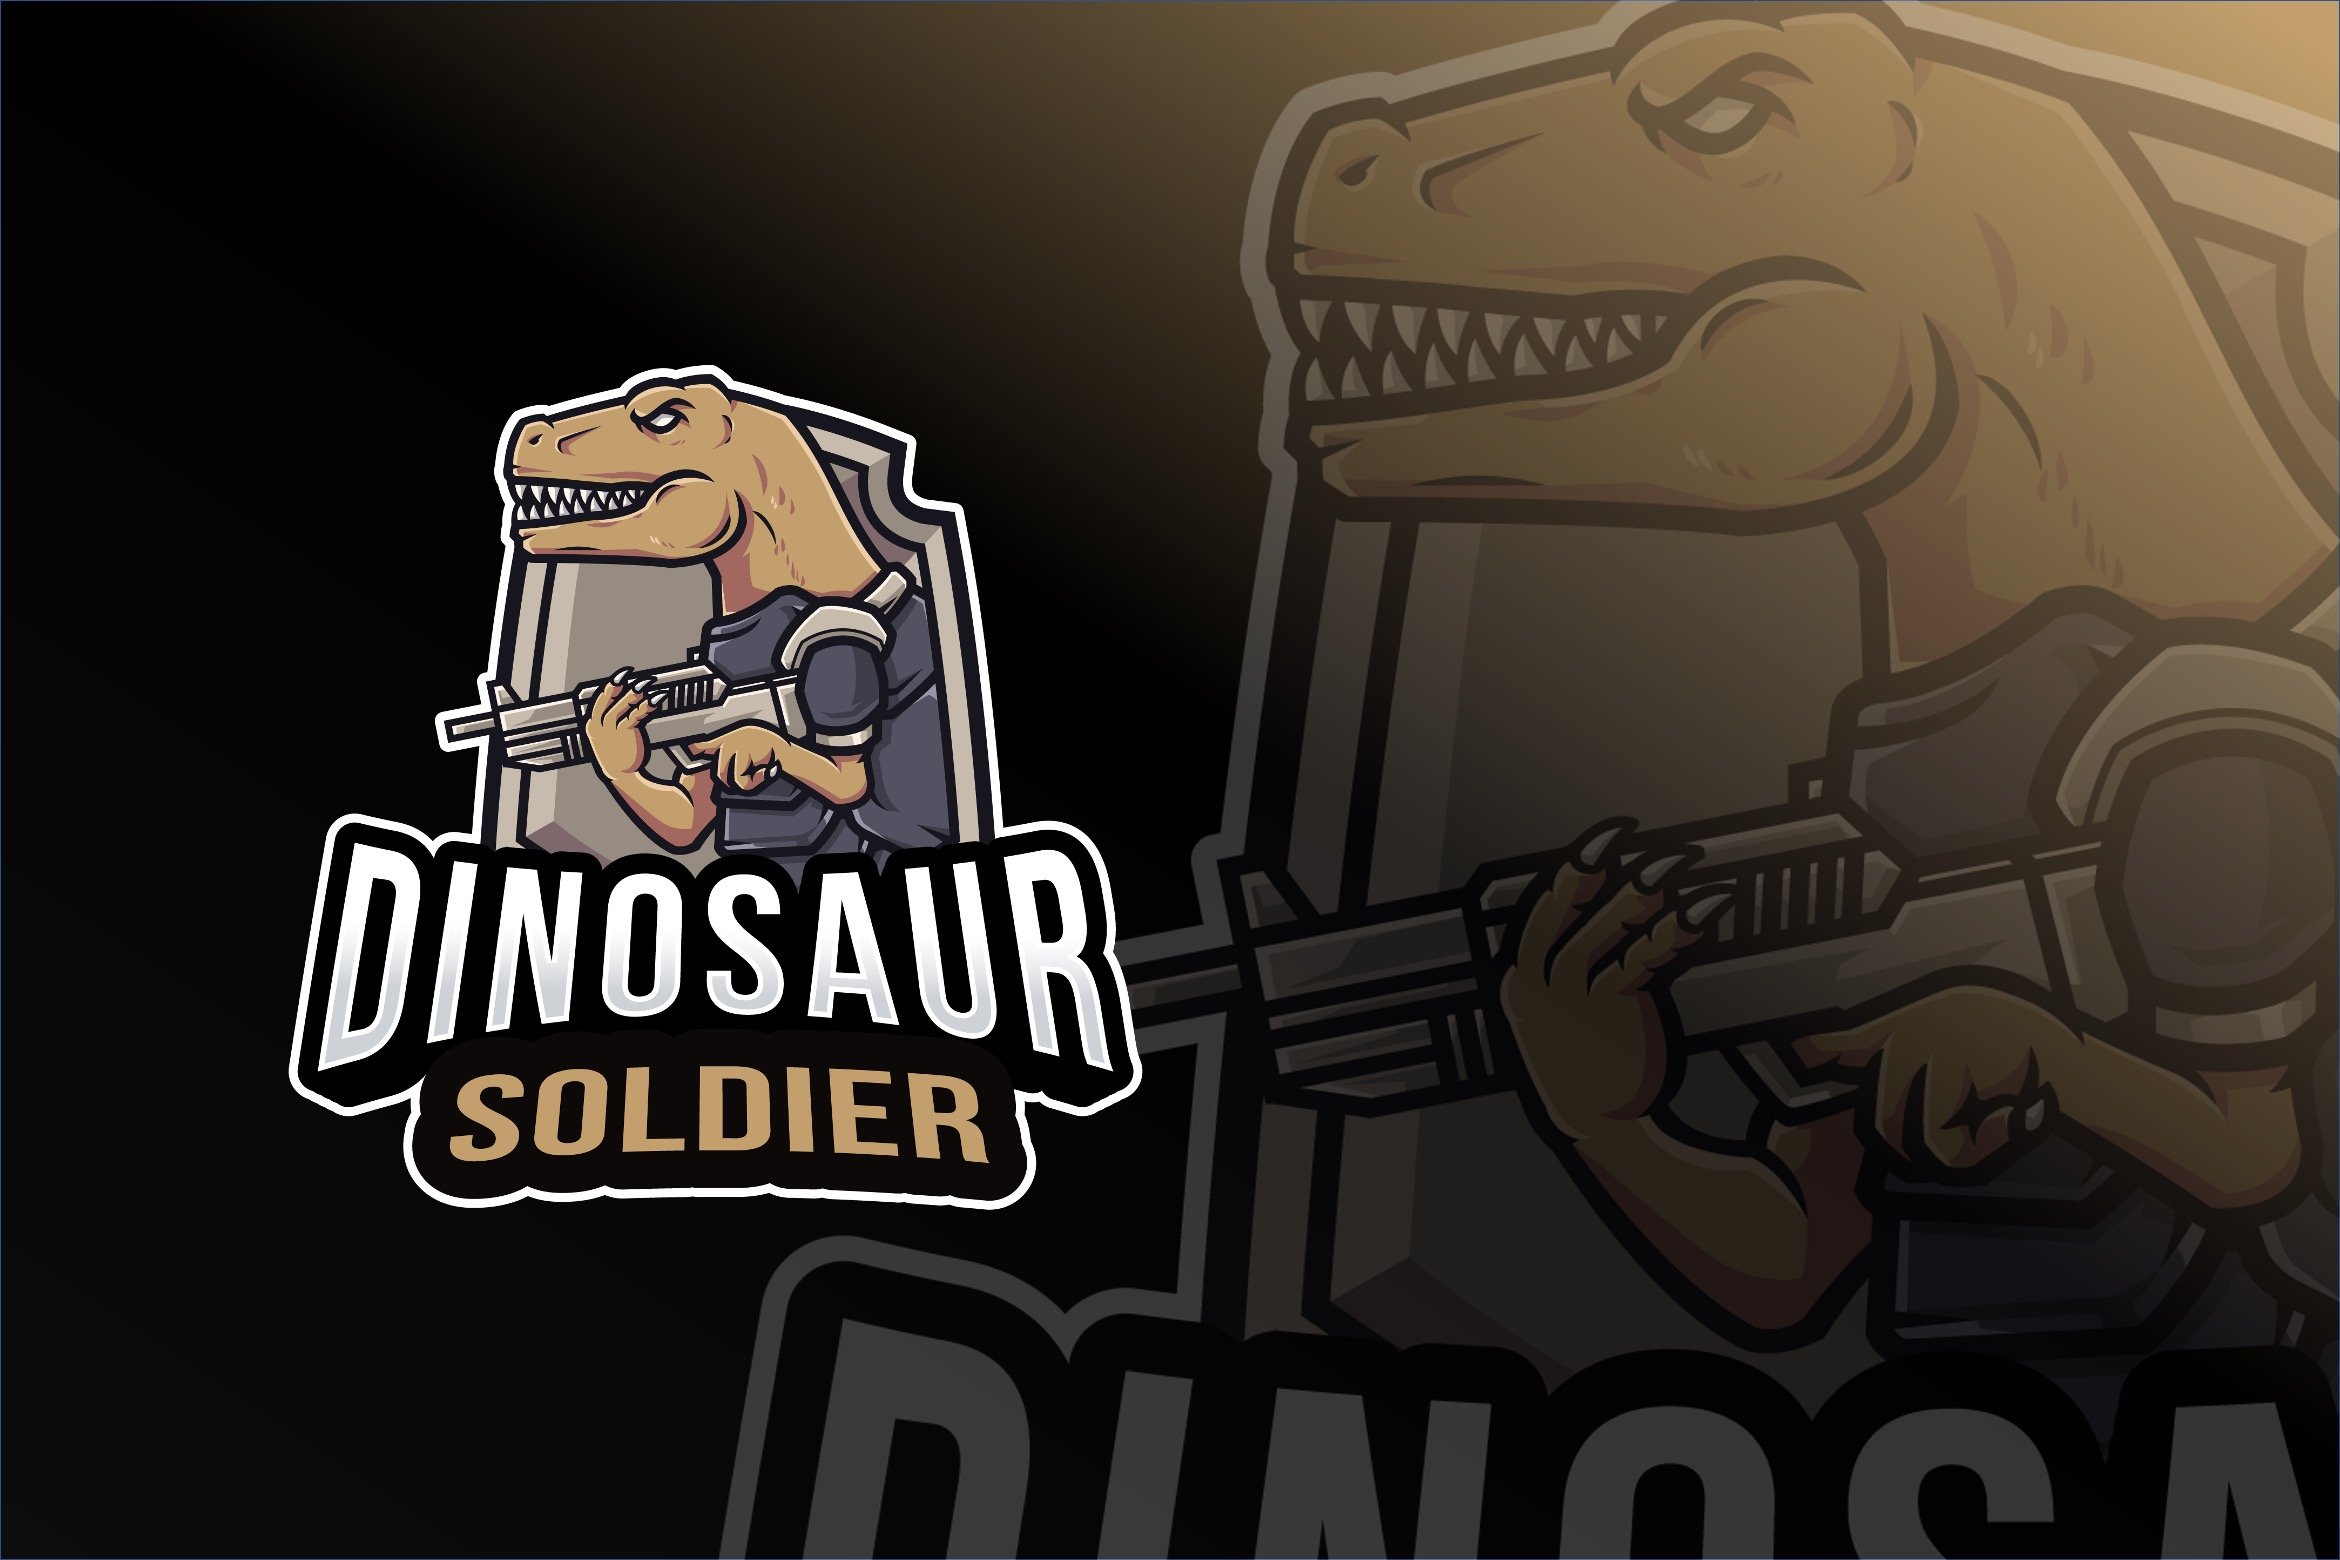 Dinosaur Soldier Logo Template cover image.